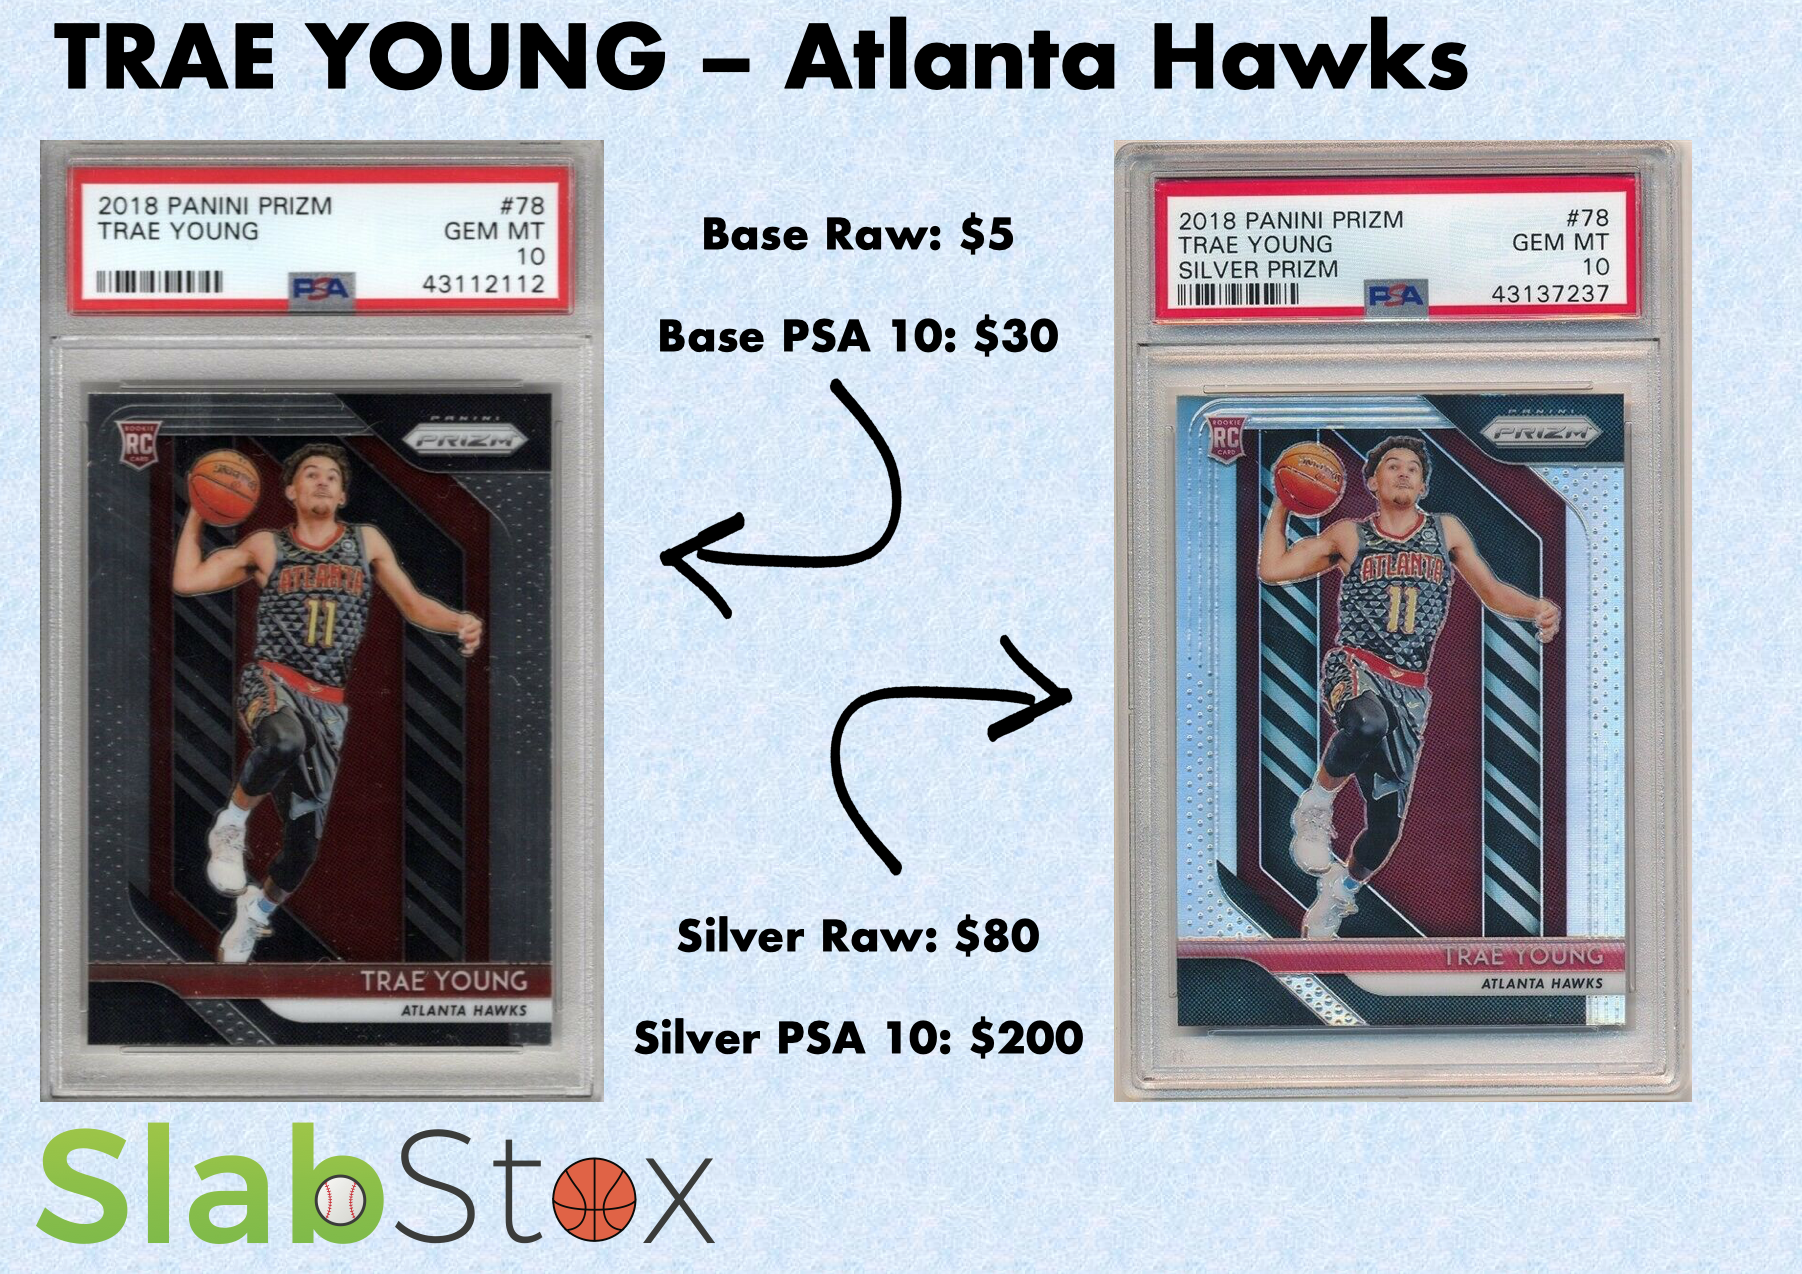 Graphic that displays two different sports cards of Trae Young, Atlanta Hawks